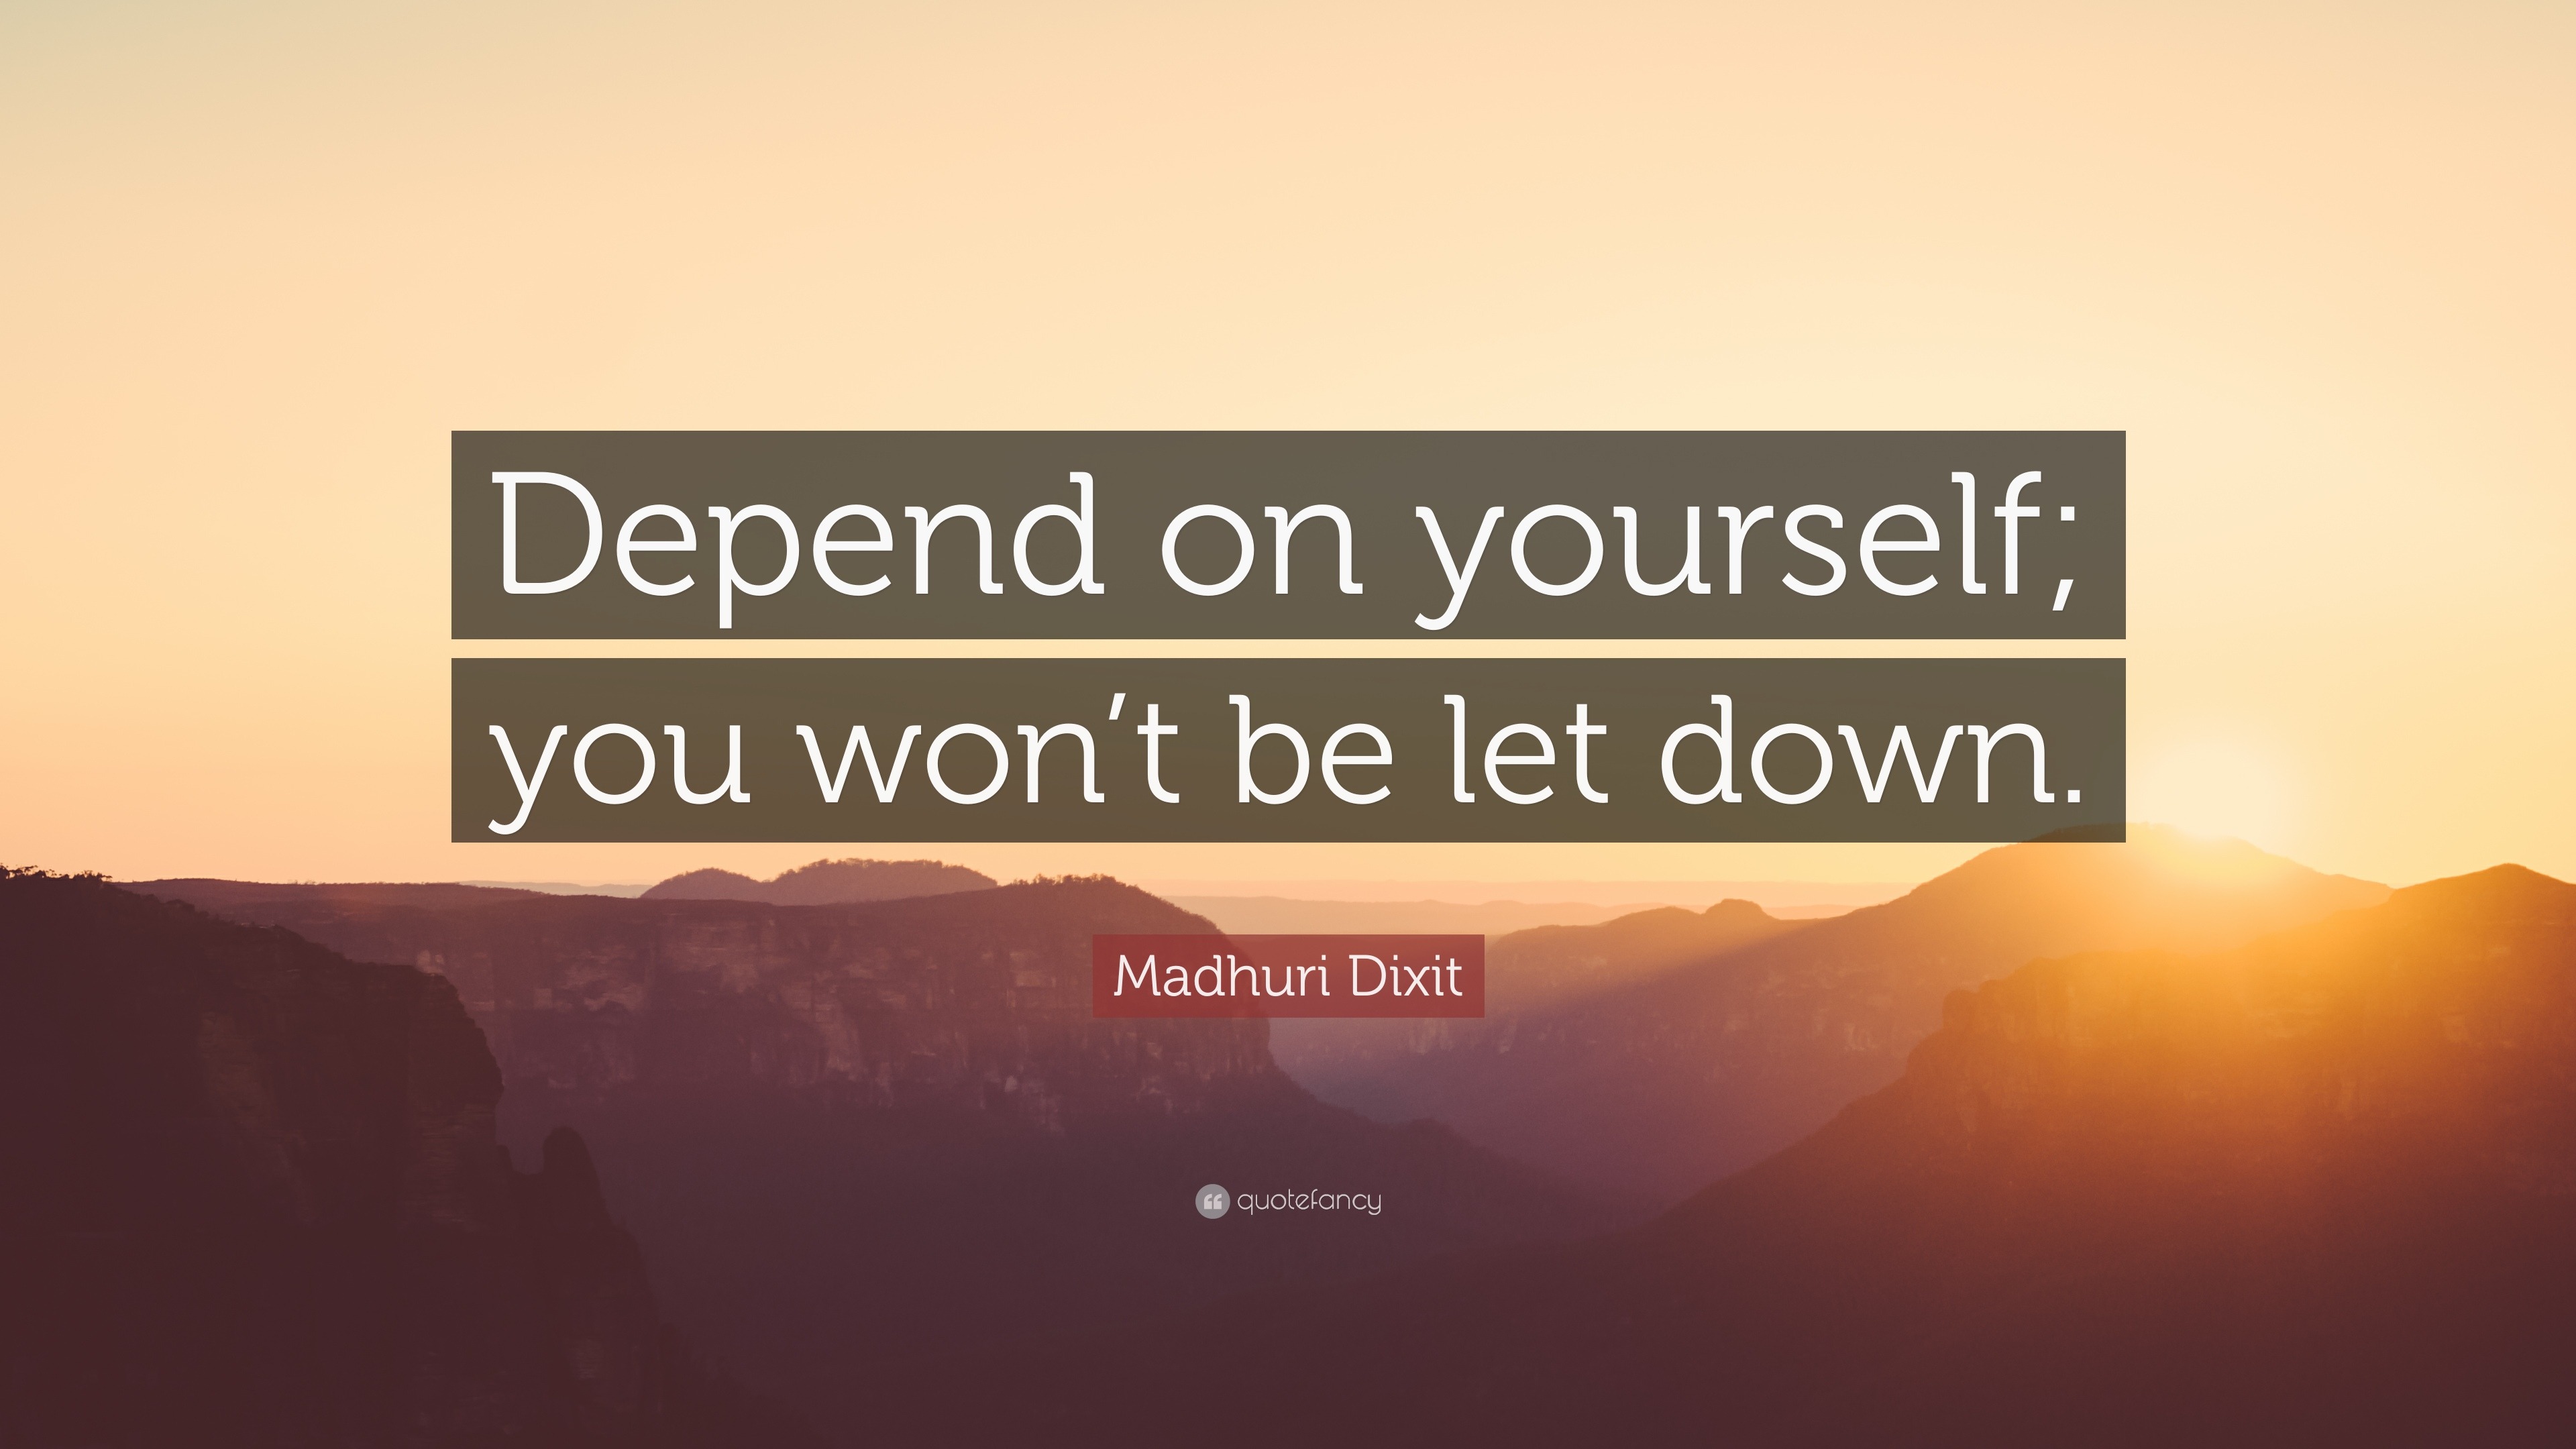 Madhuri Dixit Quote: “Depend on yourself; you won't be let down.”